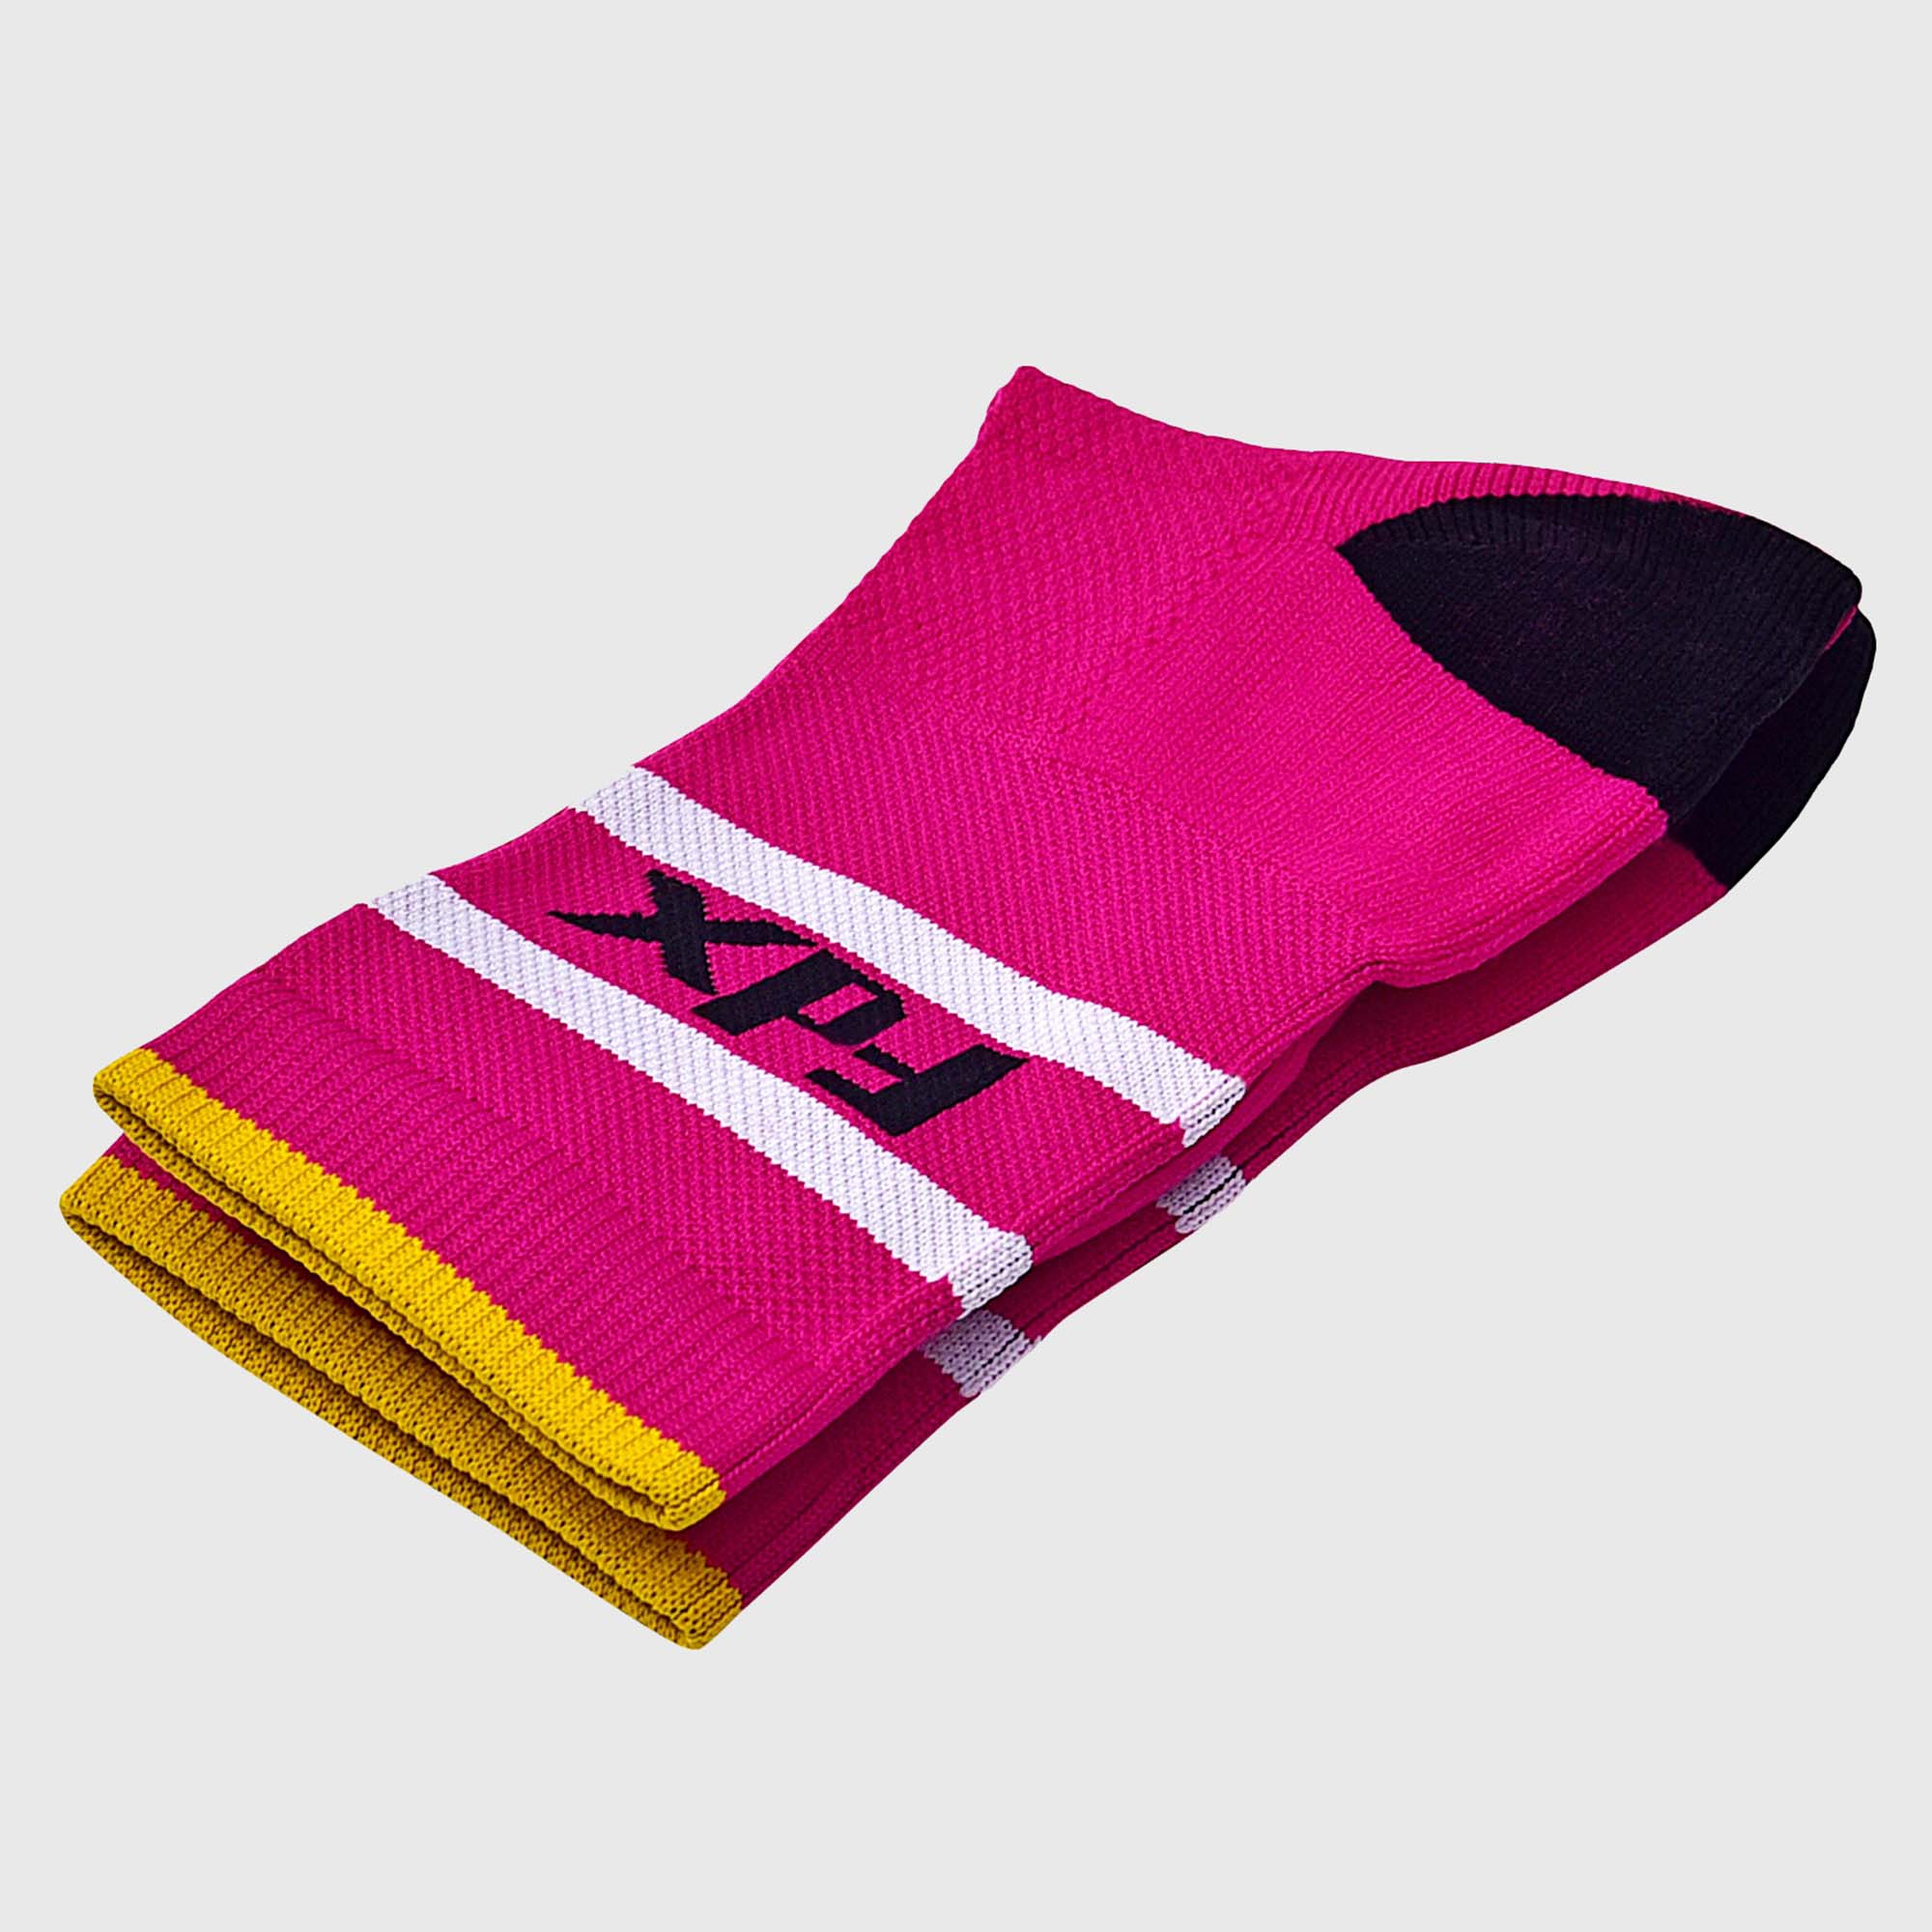 Fdx Pink Compression Socks for Cycling & Running